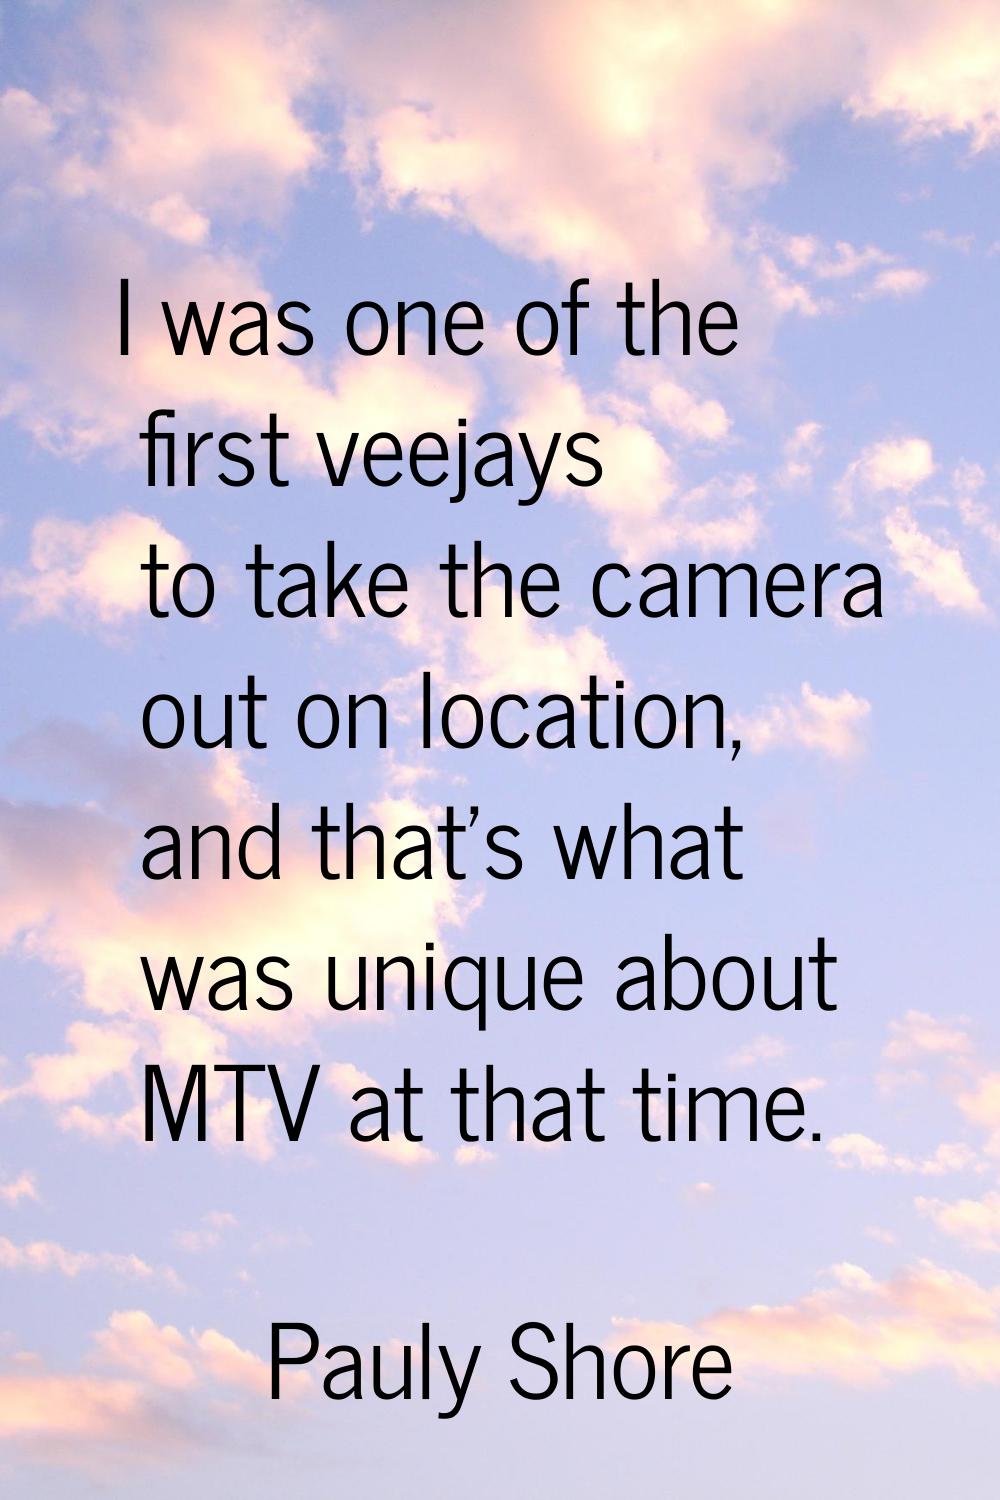 I was one of the first veejays to take the camera out on location, and that's what was unique about